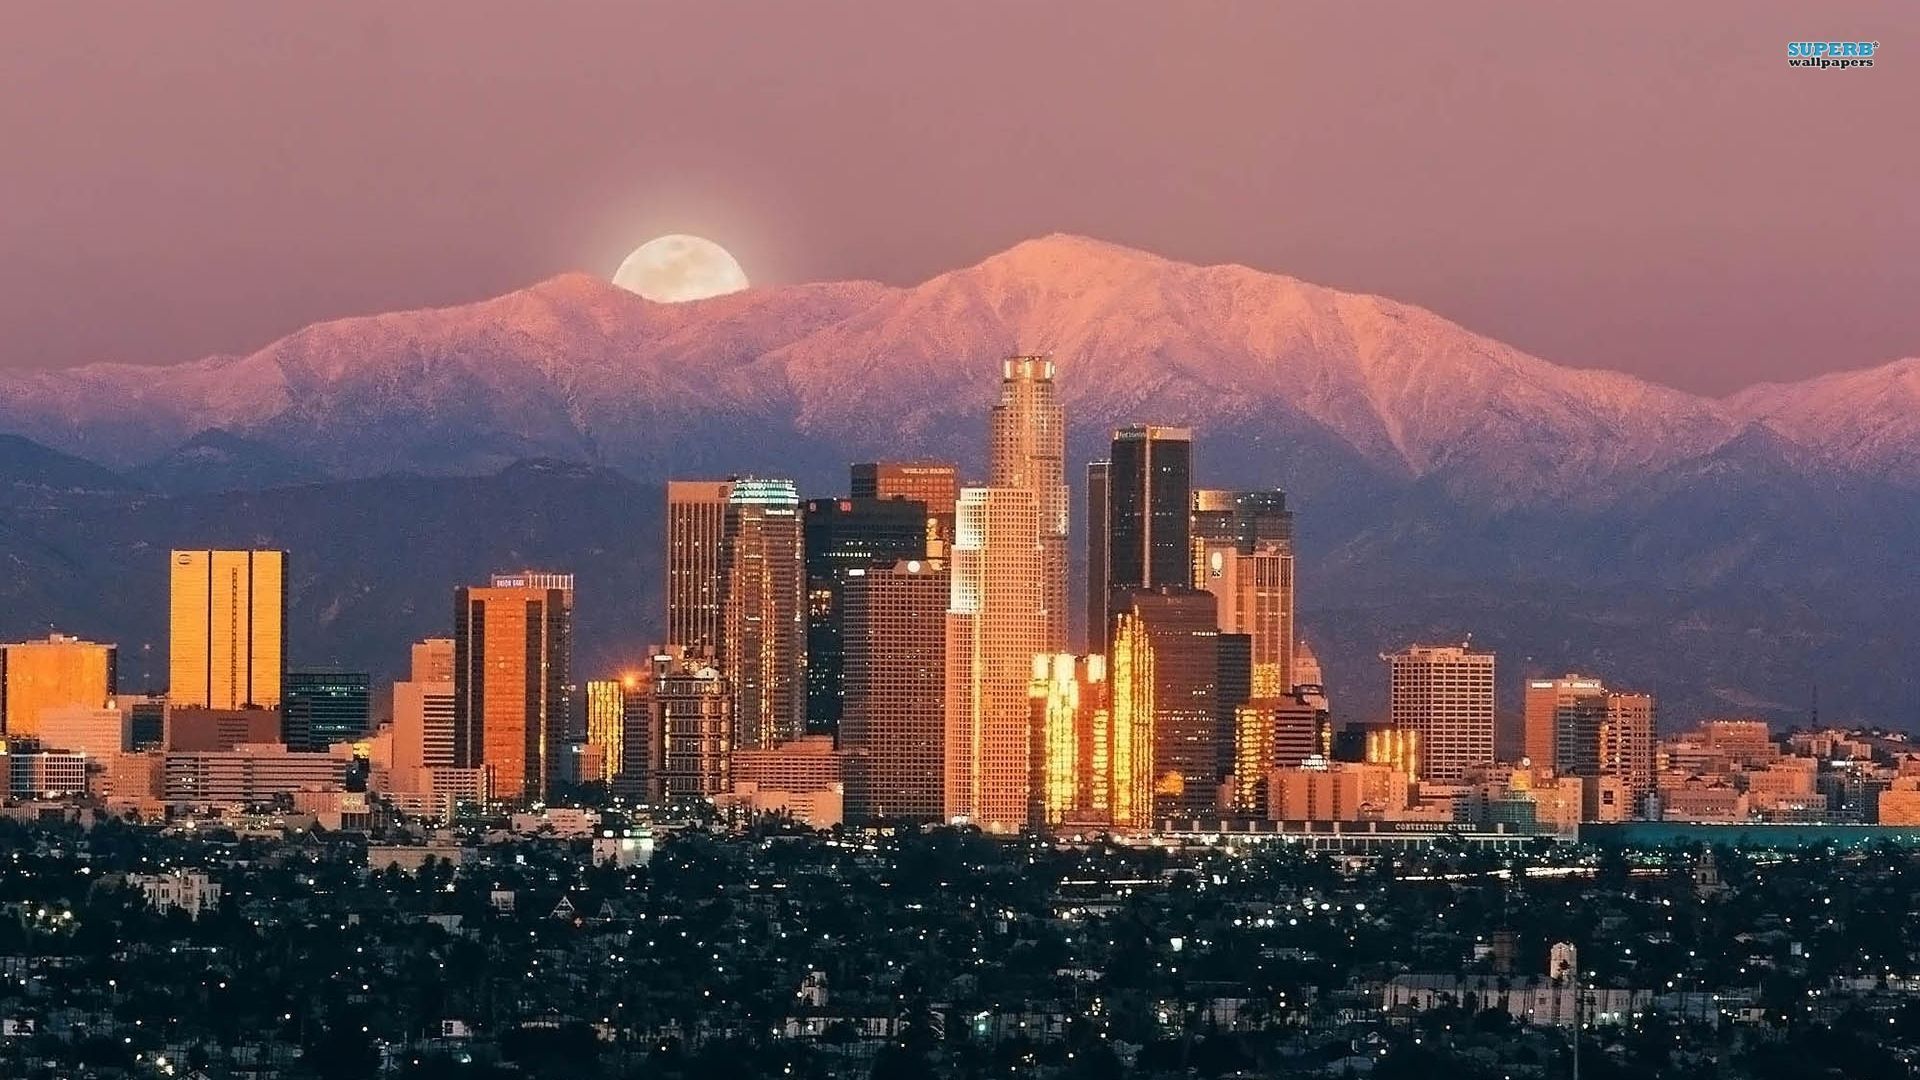 Los Angeles Most expensive city of America-united states of America